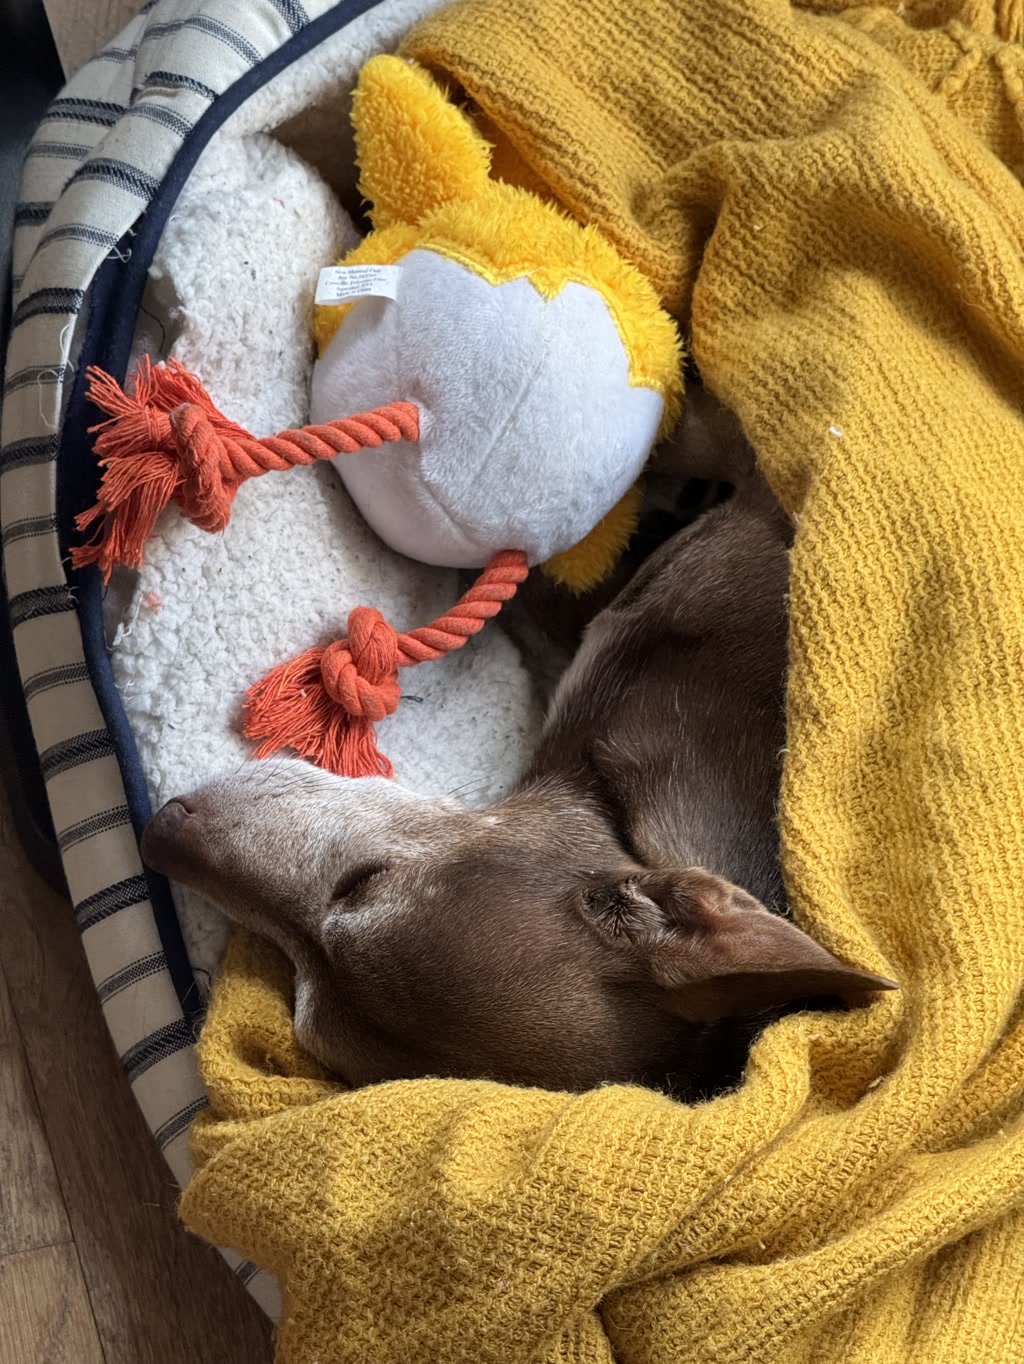 A brown dog is resting peacefully in a cozy dog bed that appears to be lined with a plush white material. The dog is partially covered with a textured mustard-yellow blanket with tassel details. Beside the dog is a yellow plush toy with a visible tag, suggesting it might be new or well-cared-for. The toy seems to be some sort of stuffed animal, albeit its full design cannot be seen. The combination of the comfortable bed, the soft blanket, and the plush toy conveys a scene of warmth and tranquility.